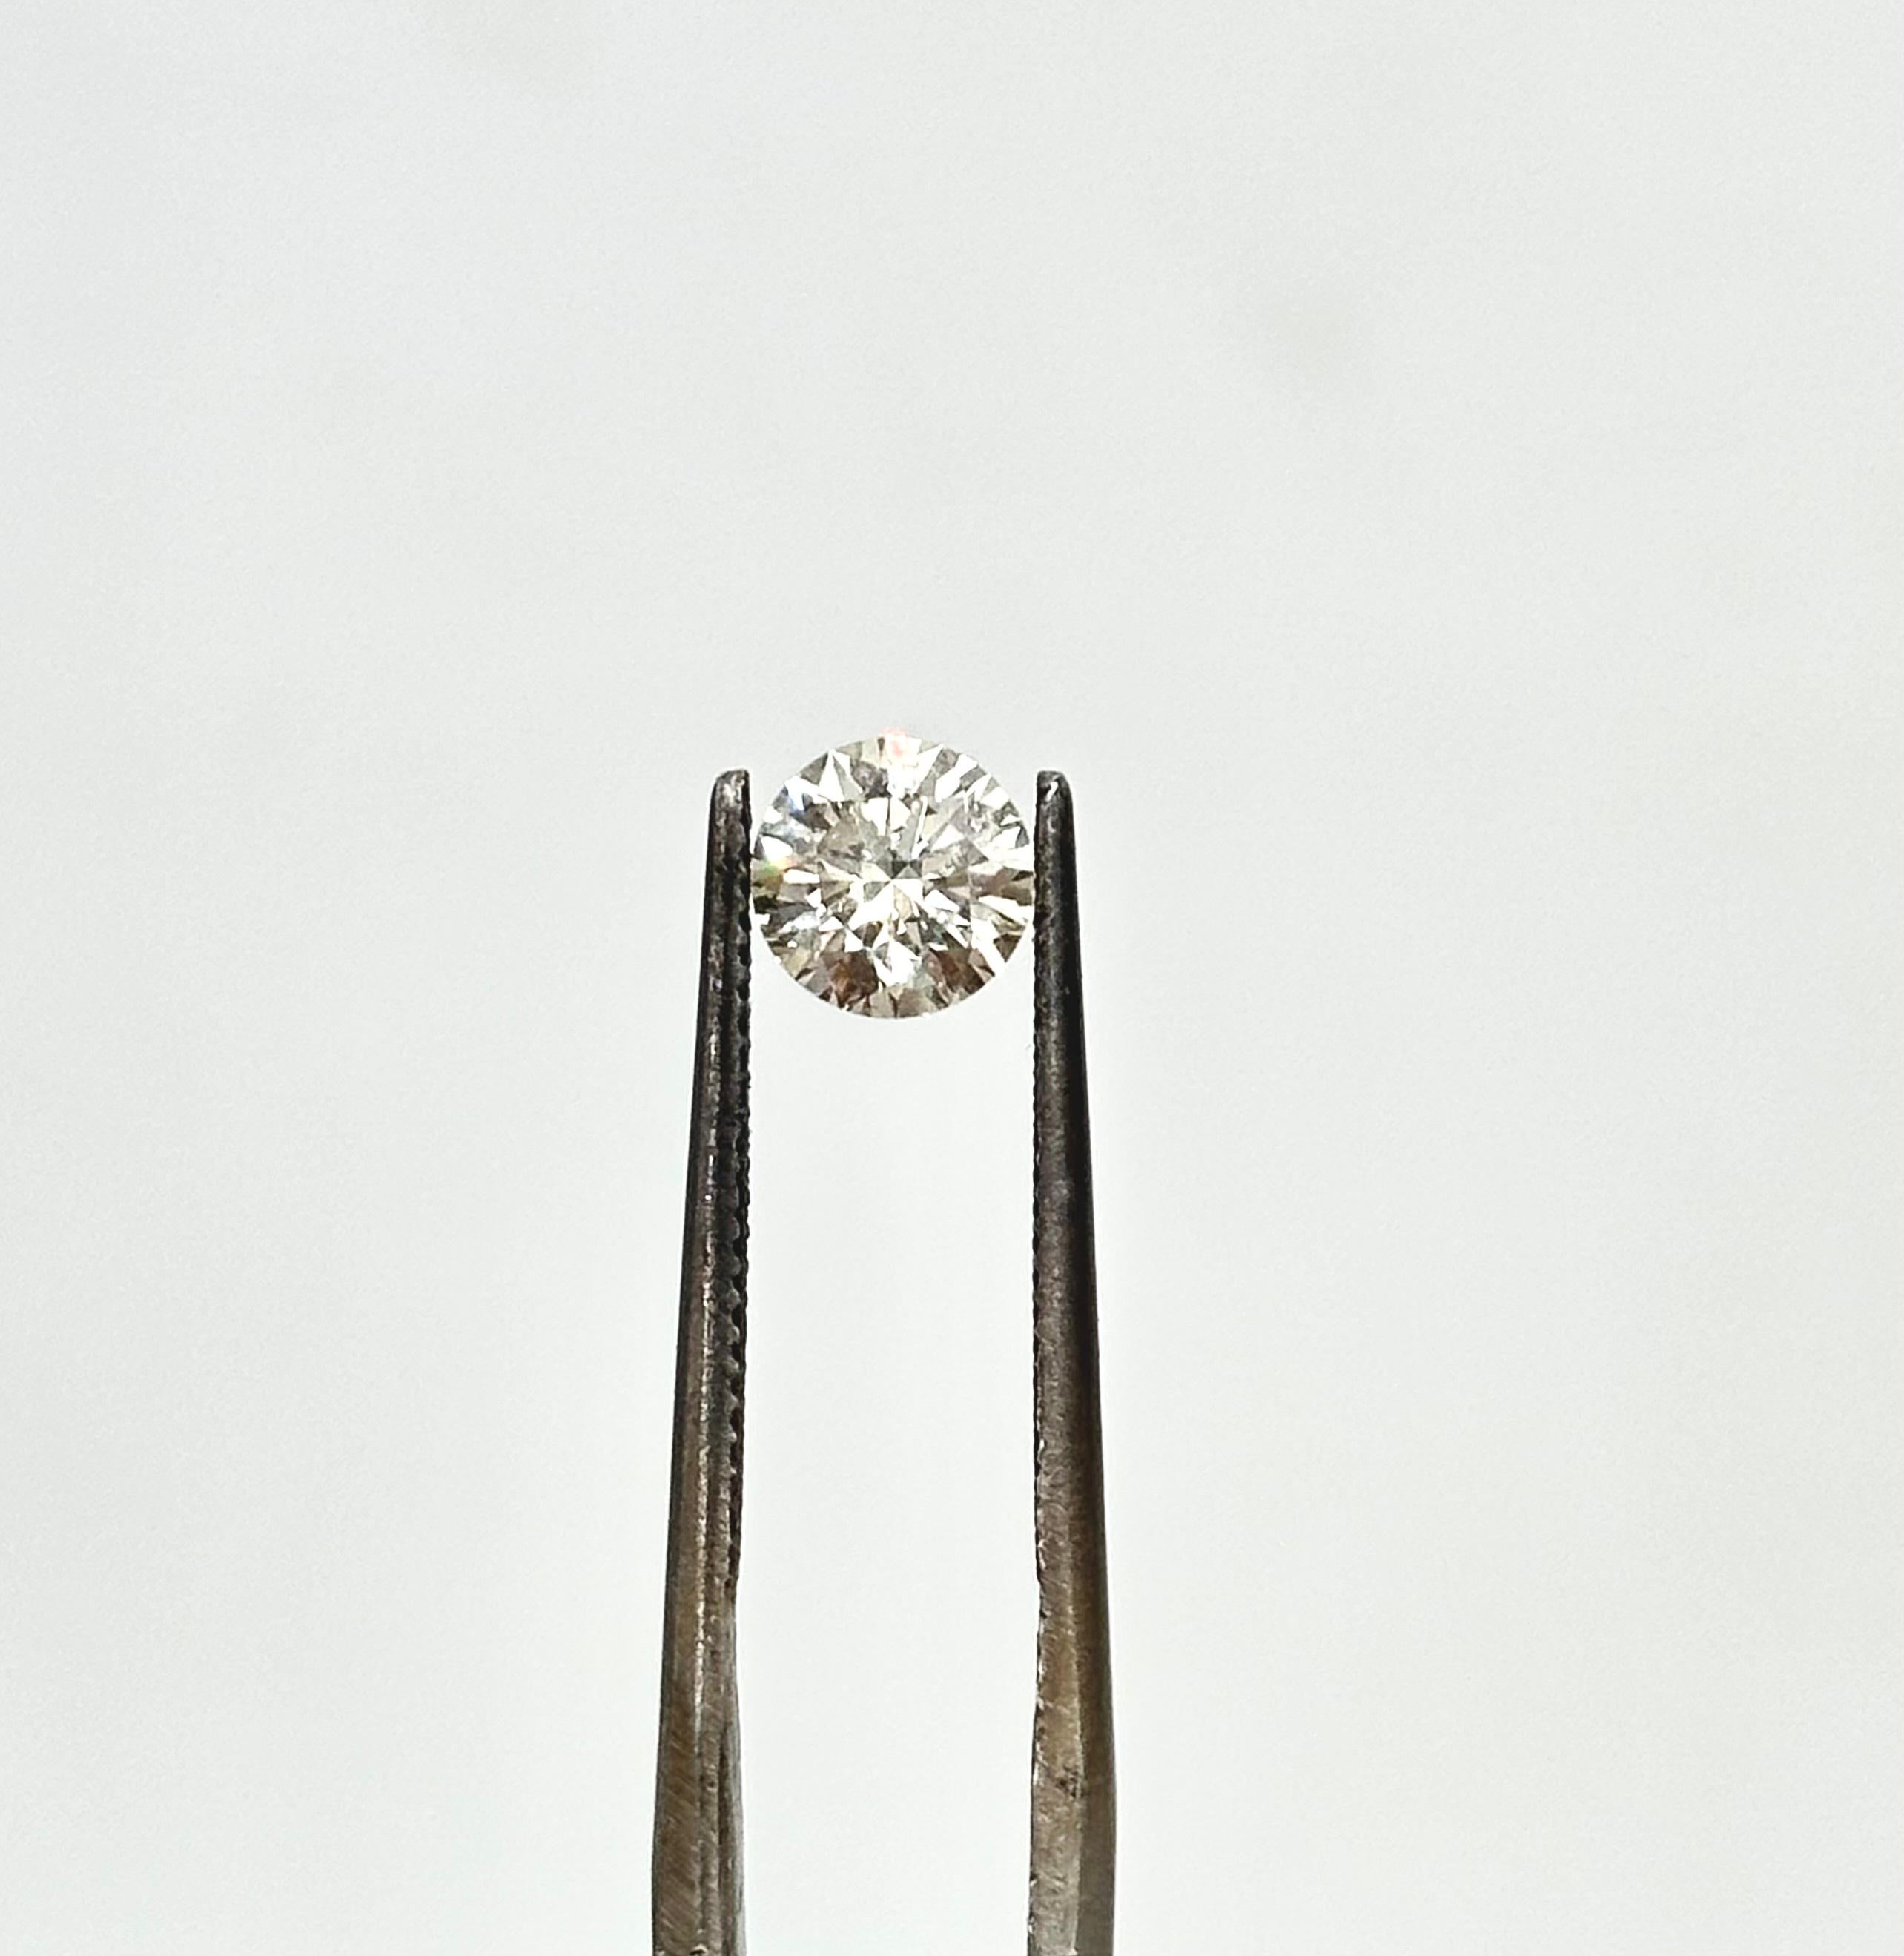 Sparkling natural cut round brilliant diamond in a 1.11 carat J VS very good cut. This diamond comes with Lab Certificate.
